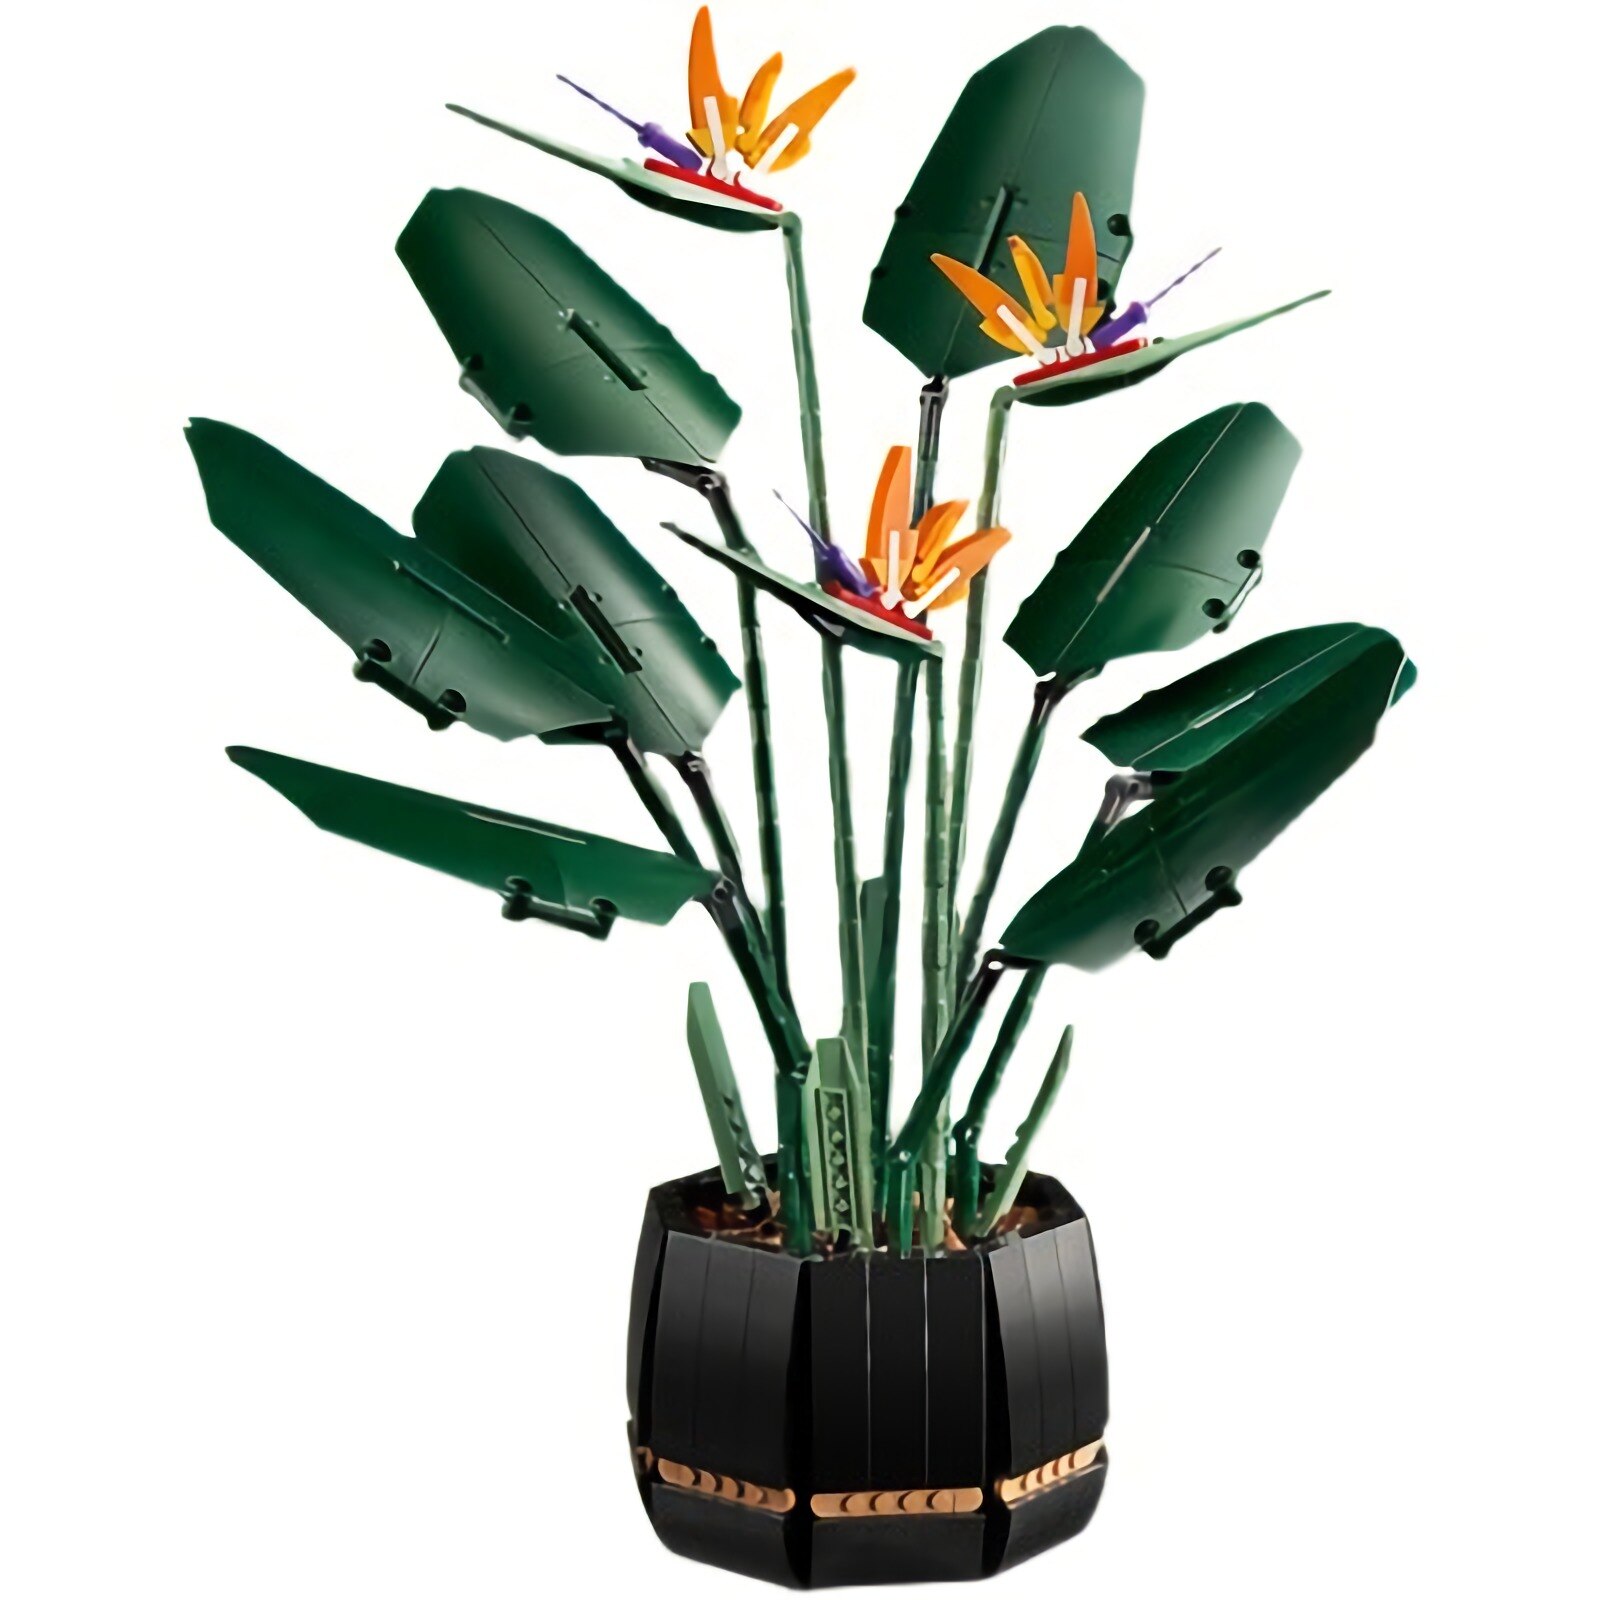 New 10289 Bird of Paradise Bouquet Rose Building Block Bricks Toys For Children DIY Potted Illustration Holiday Girlfriend Gift alx